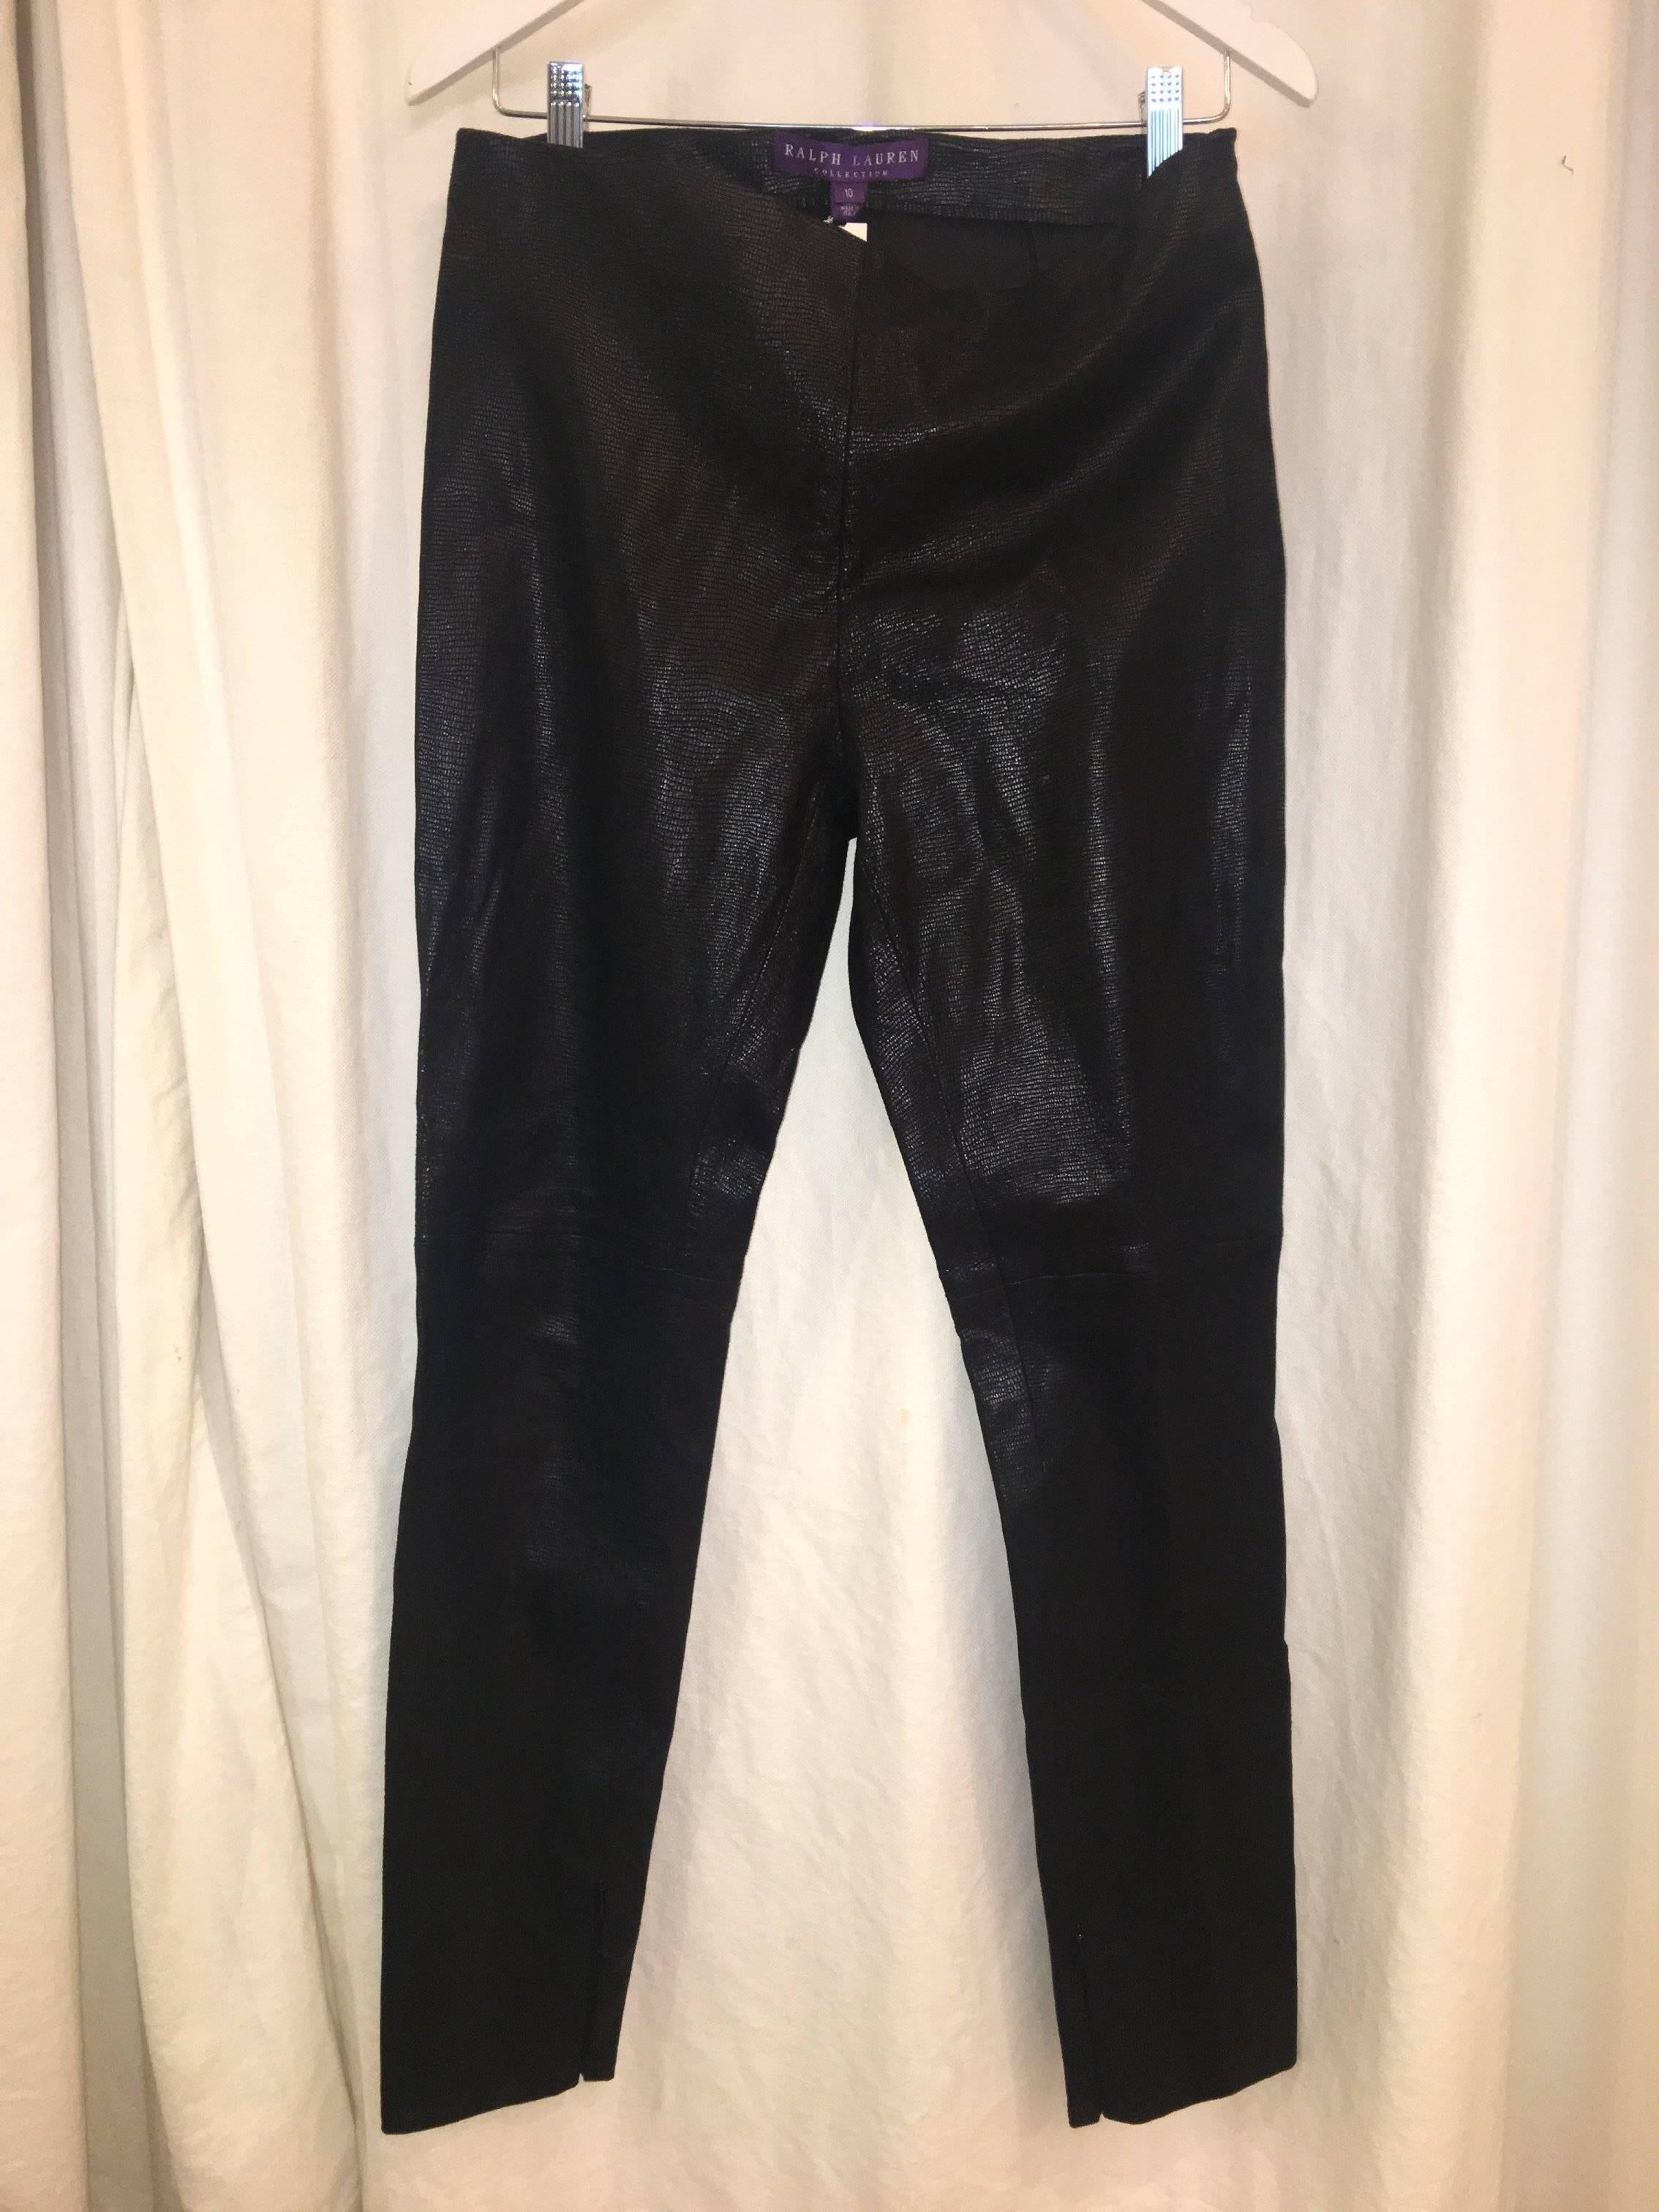 Ralph Lauren Black Lamb Leather Embossed Skinny Leg Pants with Zipper at Ankles. Retails at $1000